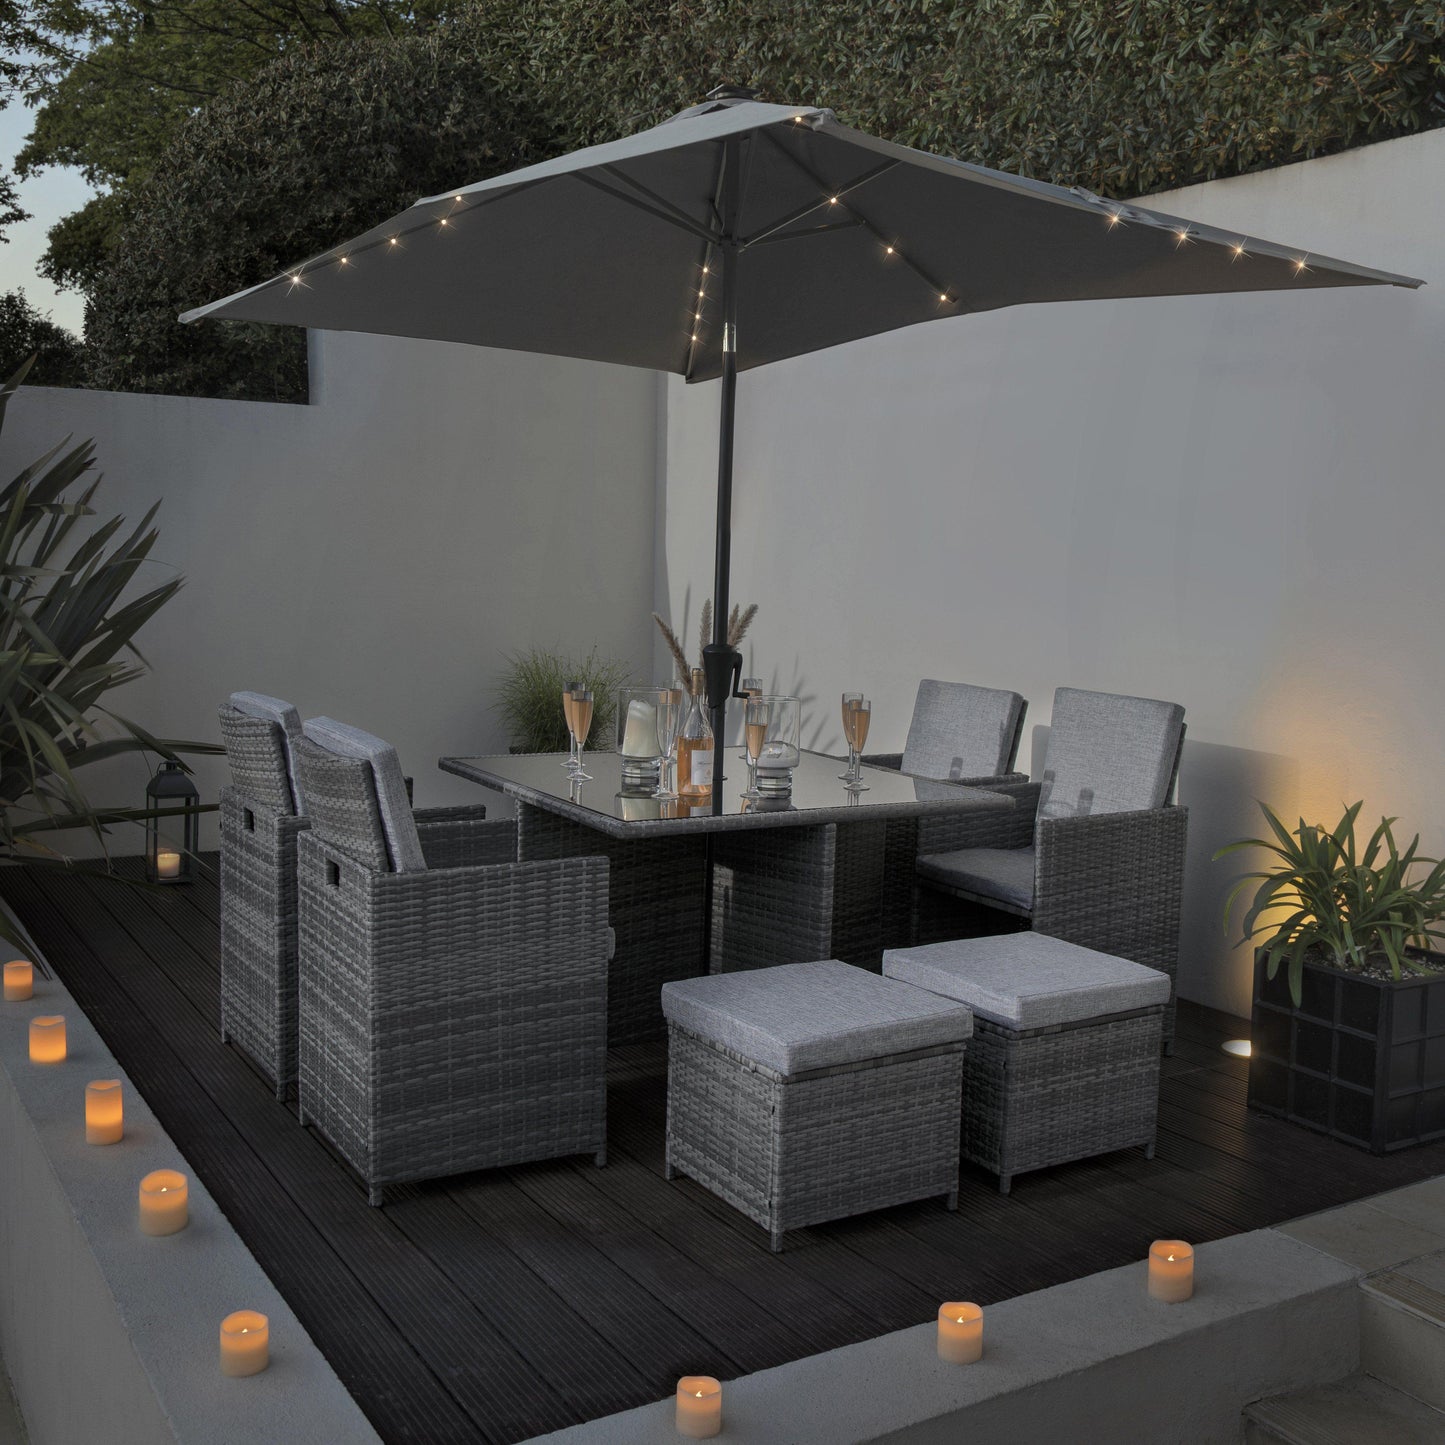 8 Seat Rattan Cube Outdoor Dining Set with LED Premium Parasol - Grey Weave with Grey Cushion - Laura James